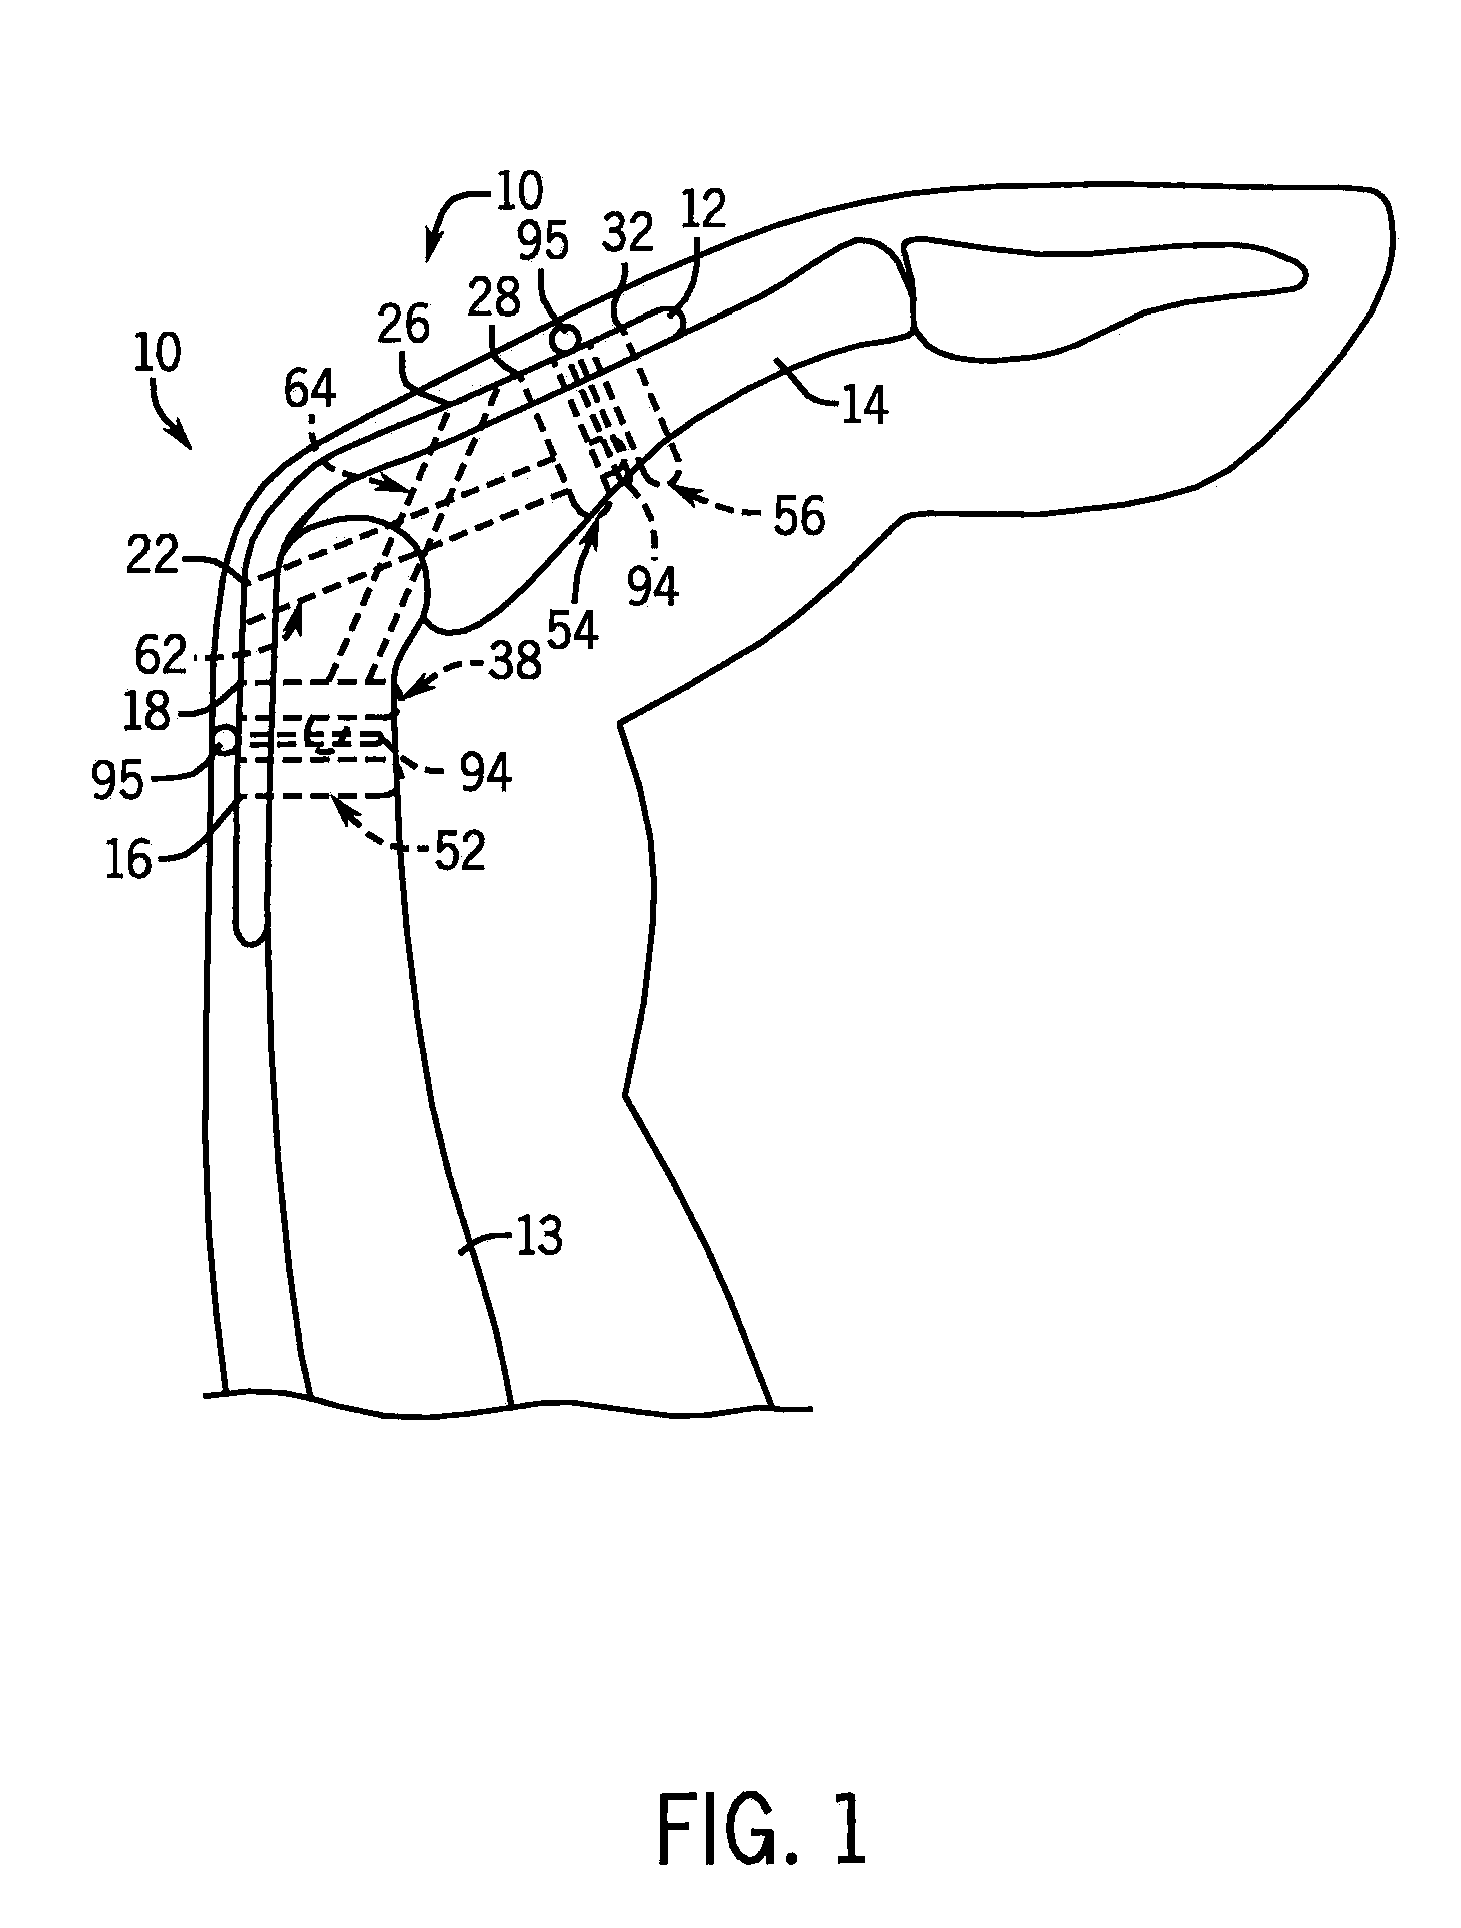 Joint Fixation System For the Hand